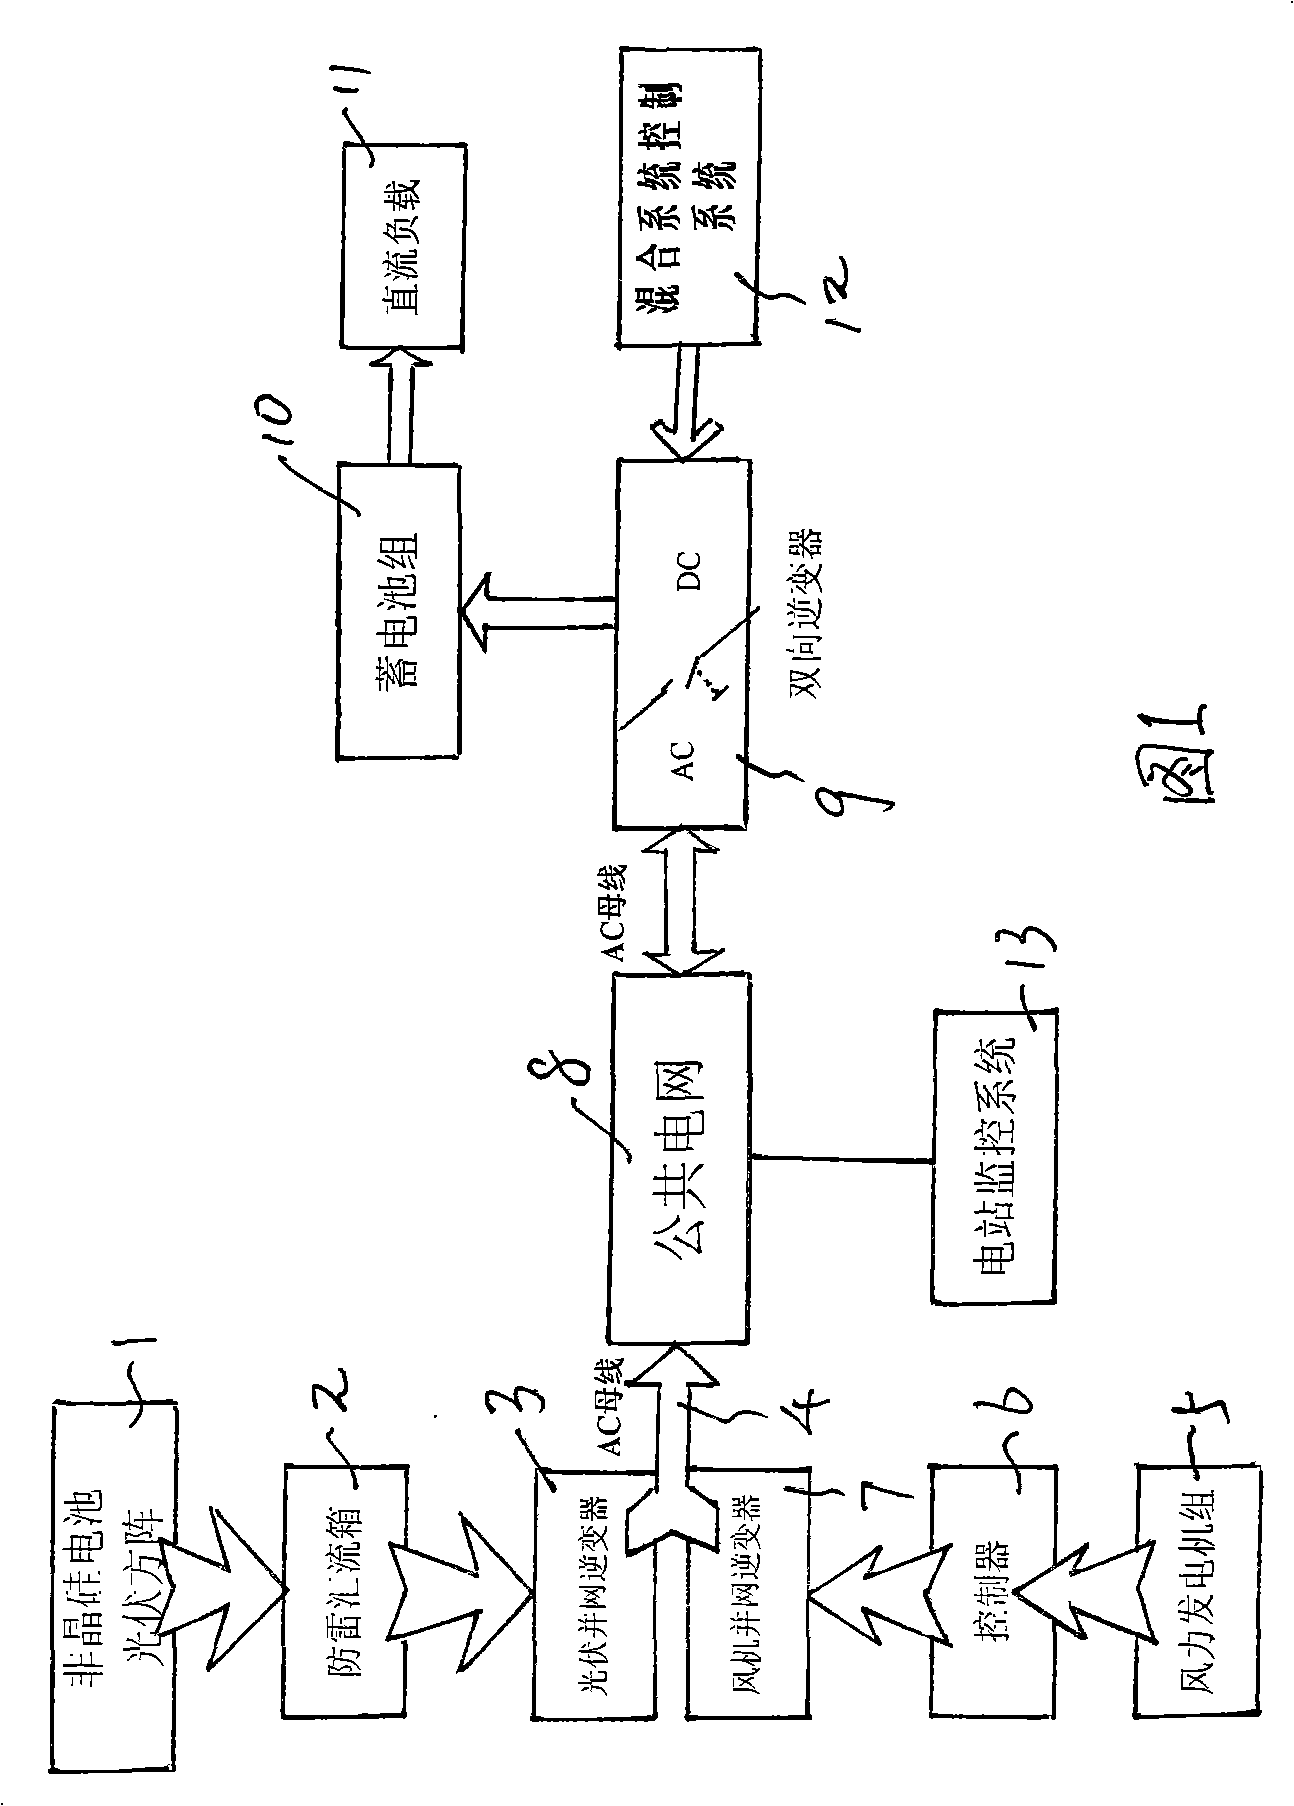 Complementary system of thin-film cell photovoltaic power station and wind electric field